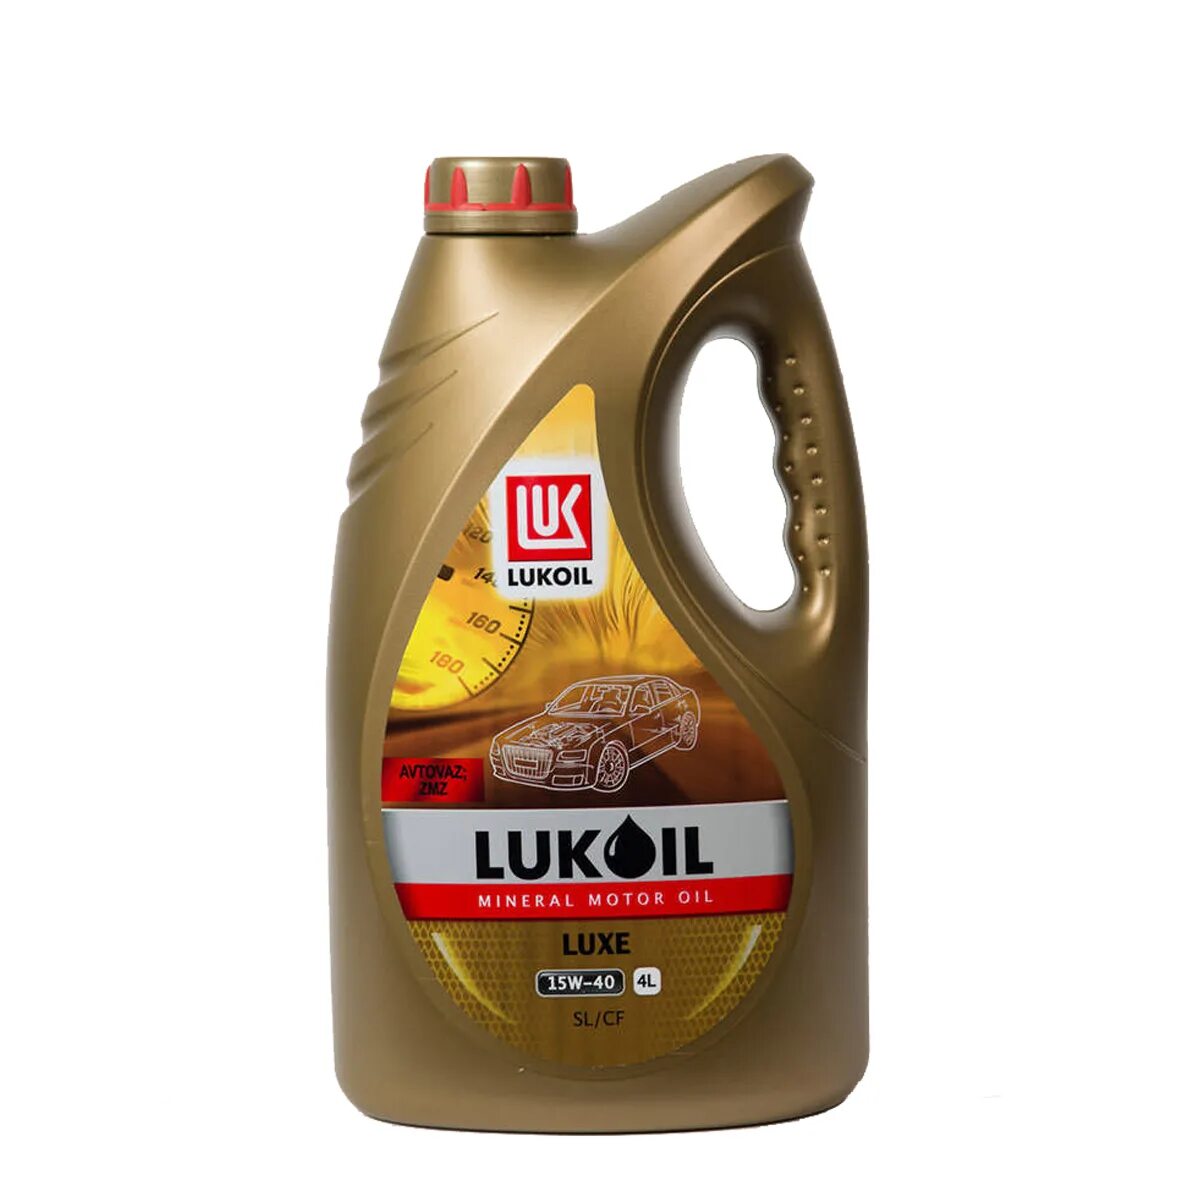 Lukoil Luxe 15w-40. Лукойл Люкс 10w30. Lukoil. Sae15w40. Масло Luxe 15w40 минеральное. 5w 30 api sl cf